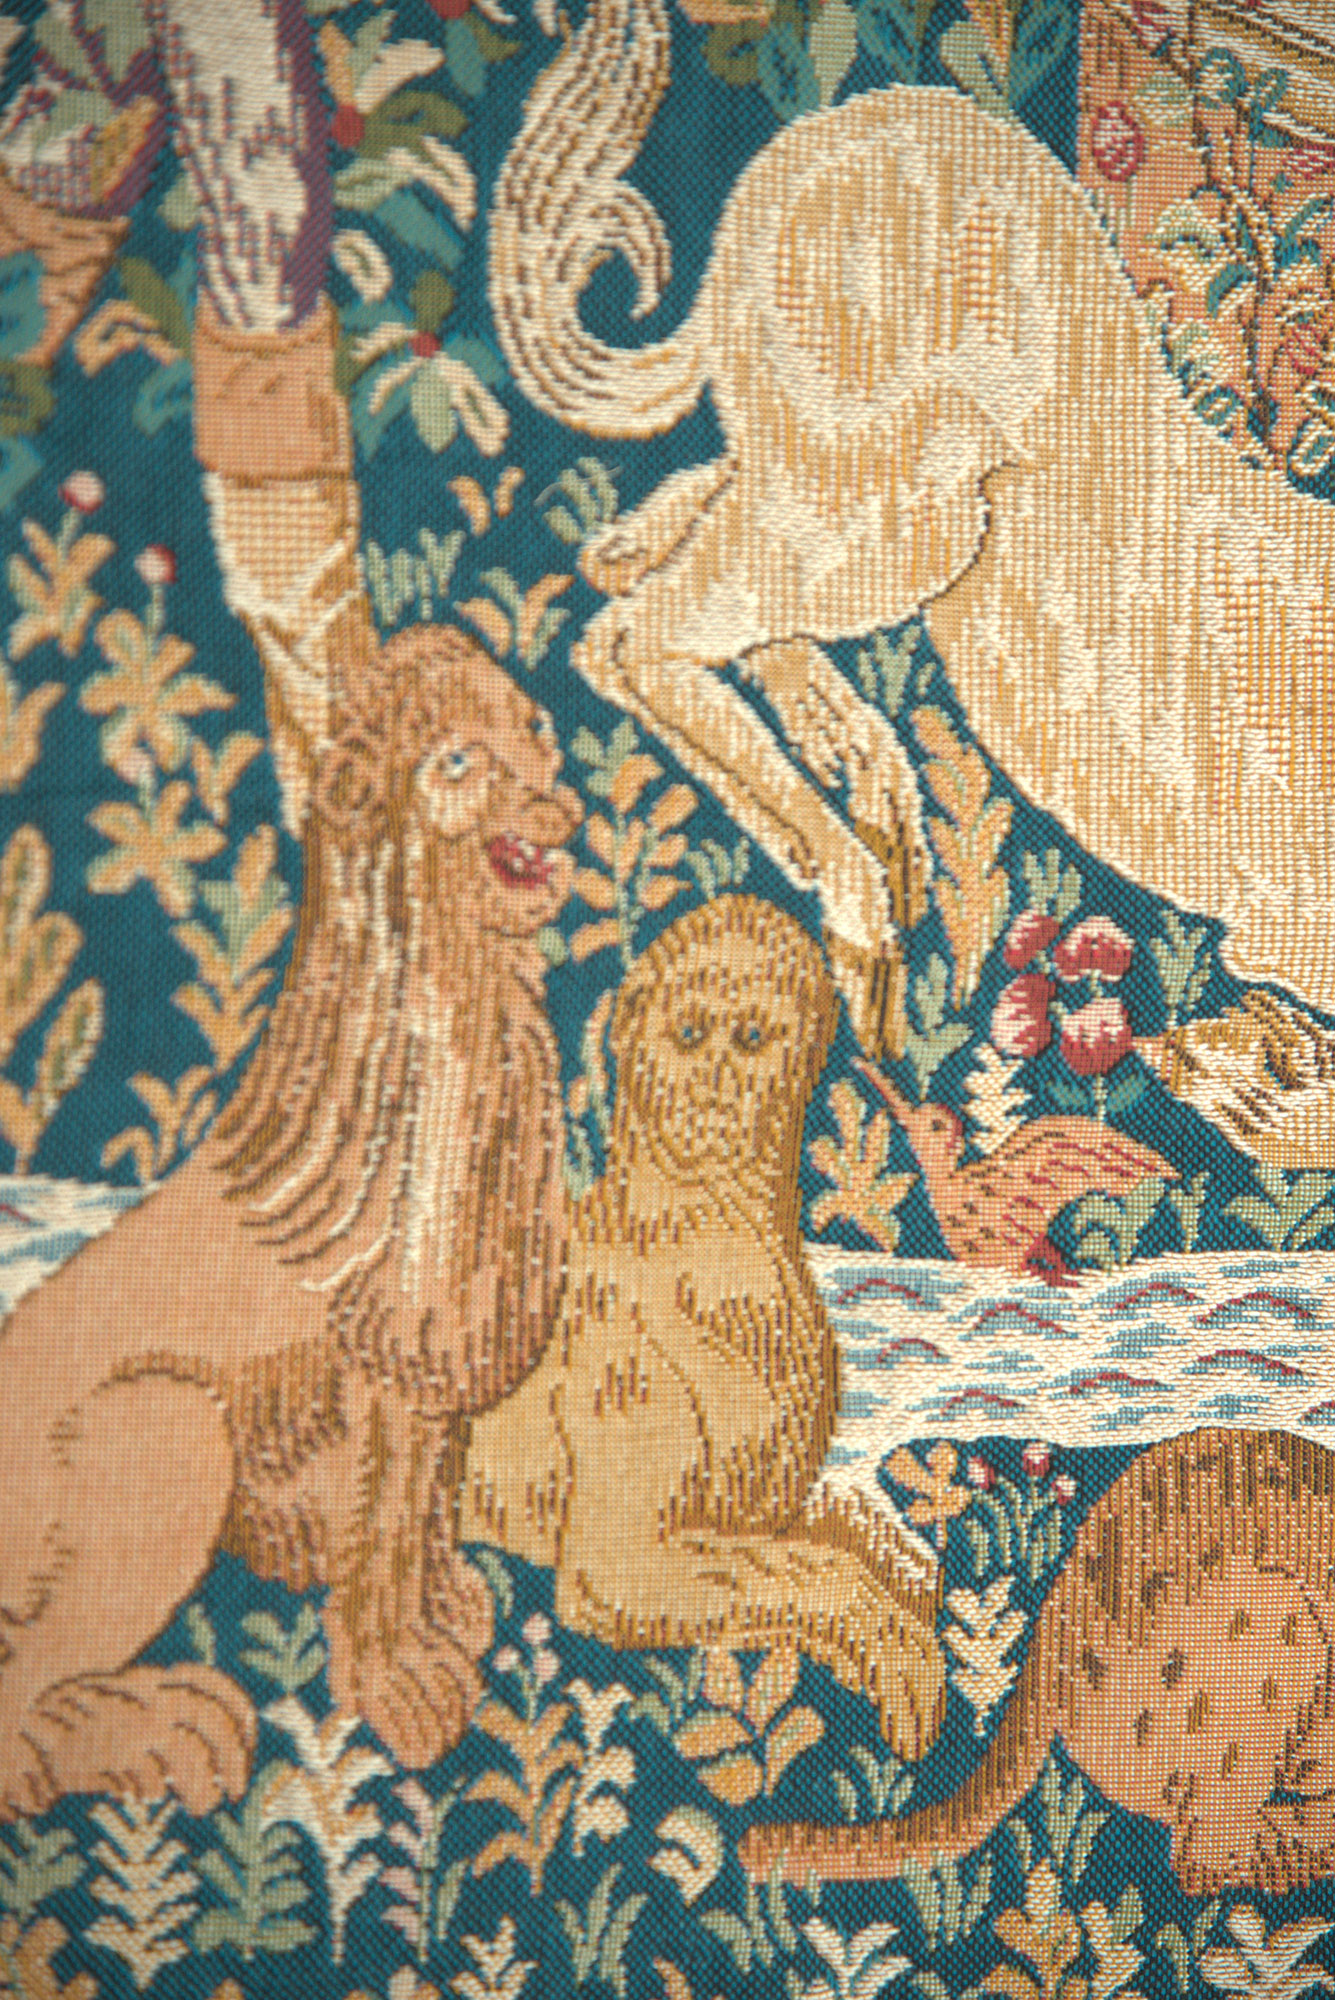 Licorne A La Fontaine French Tapestry | Close Up 2